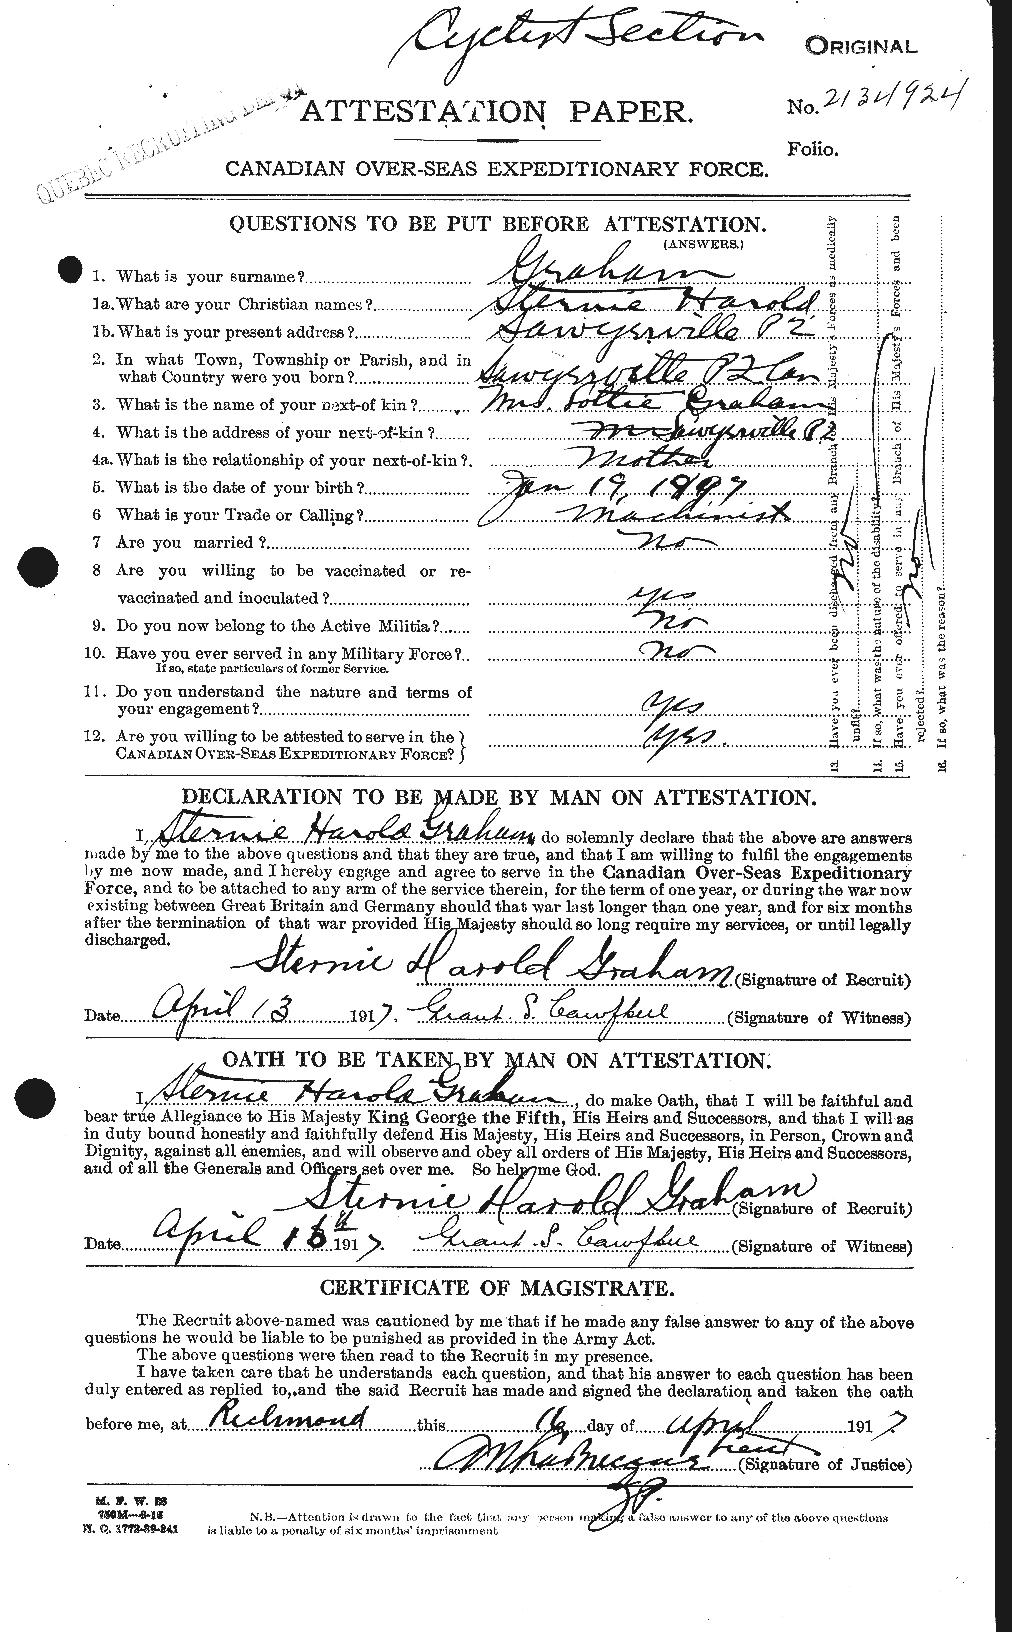 Personnel Records of the First World War - CEF 359471a